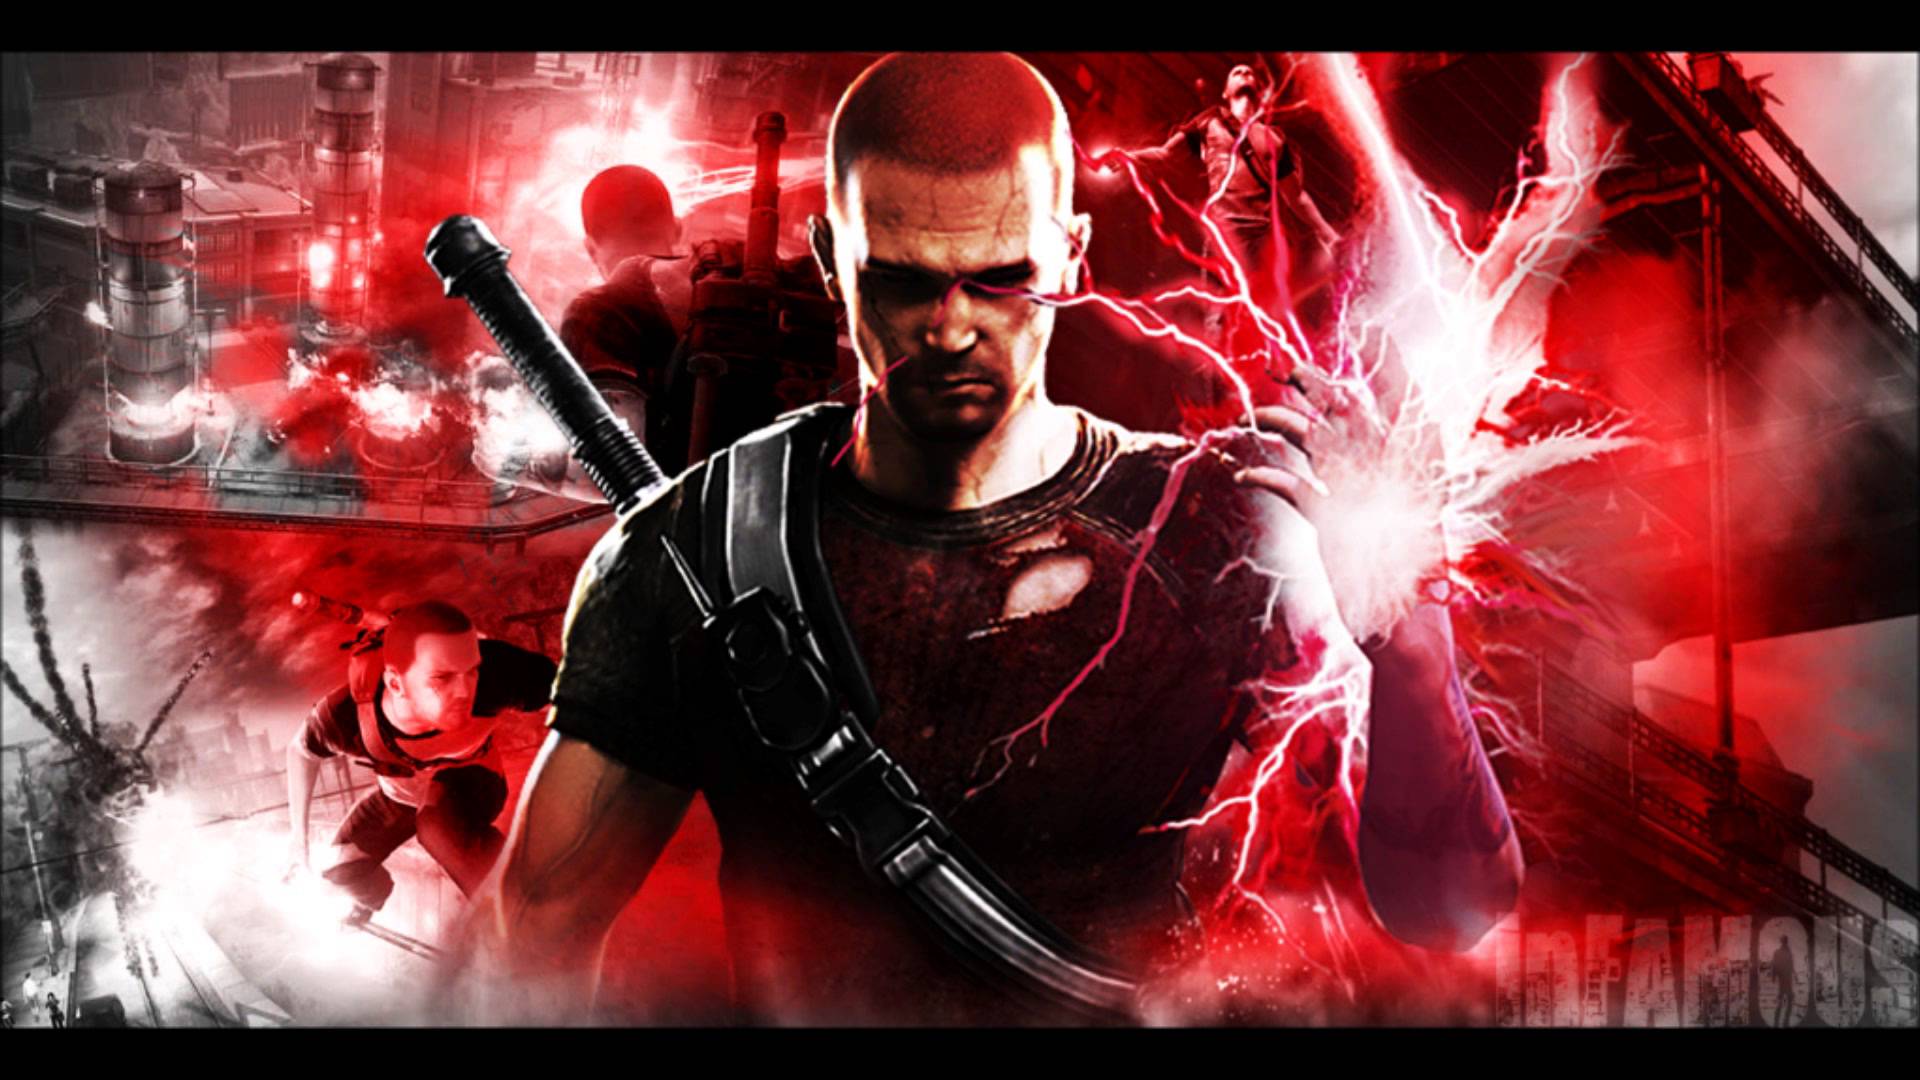 HQ InFAMOUS 2 Wallpapers | File 195.56Kb